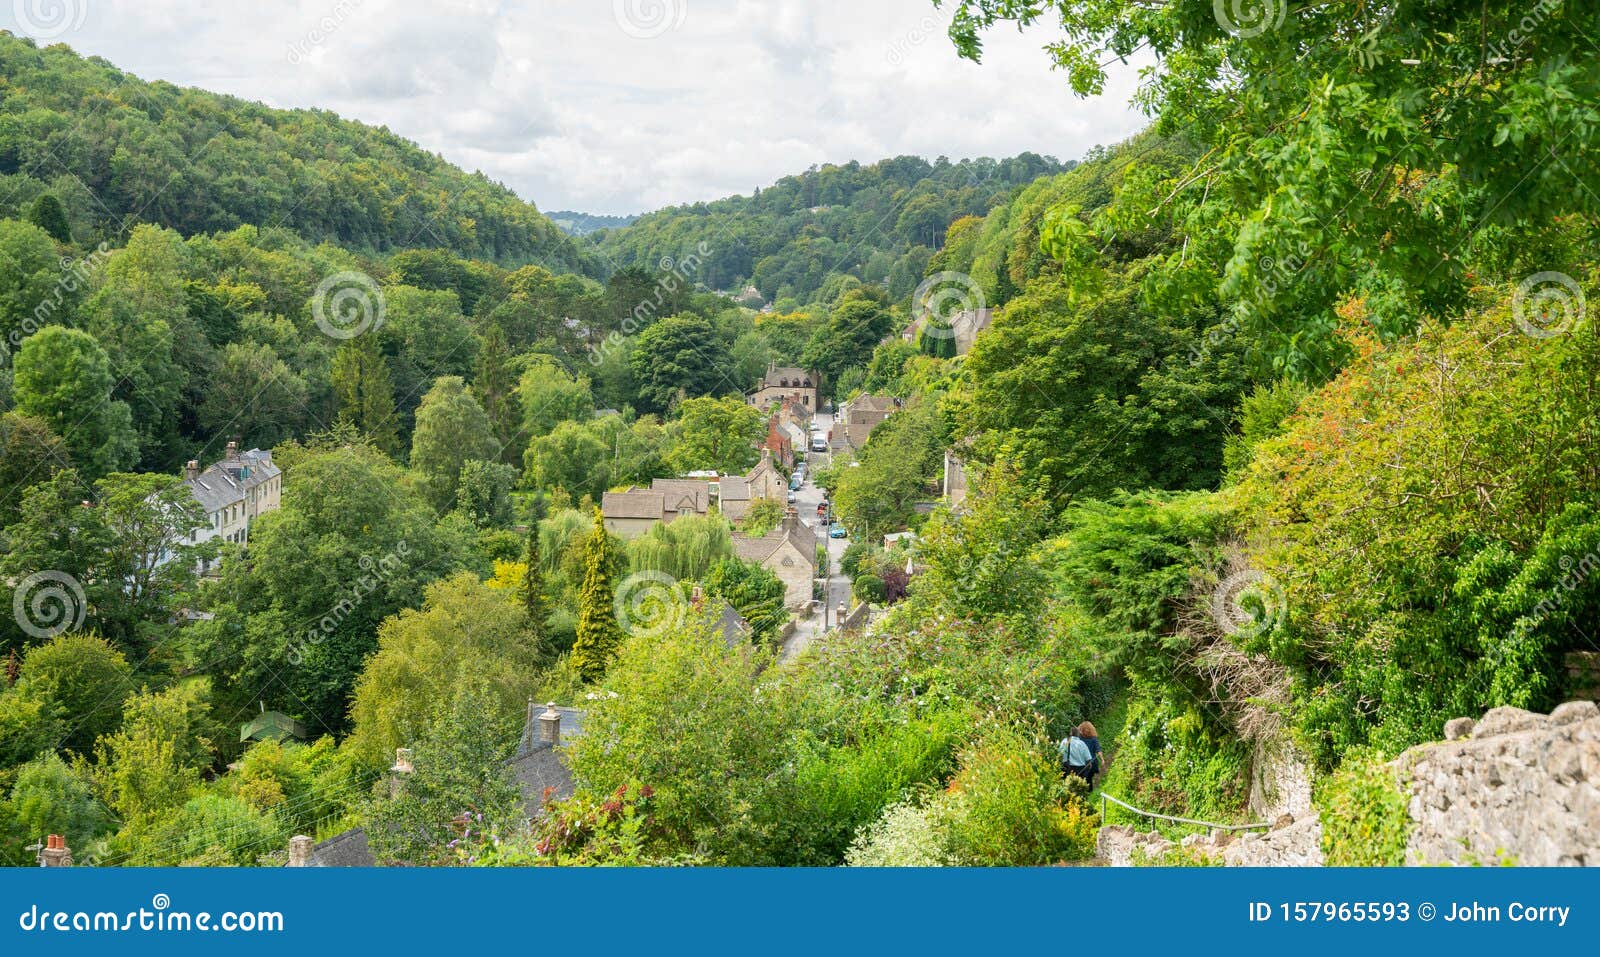 view of the village of chalford, stroud, the cotswolds, gloucestershire, united kingdom